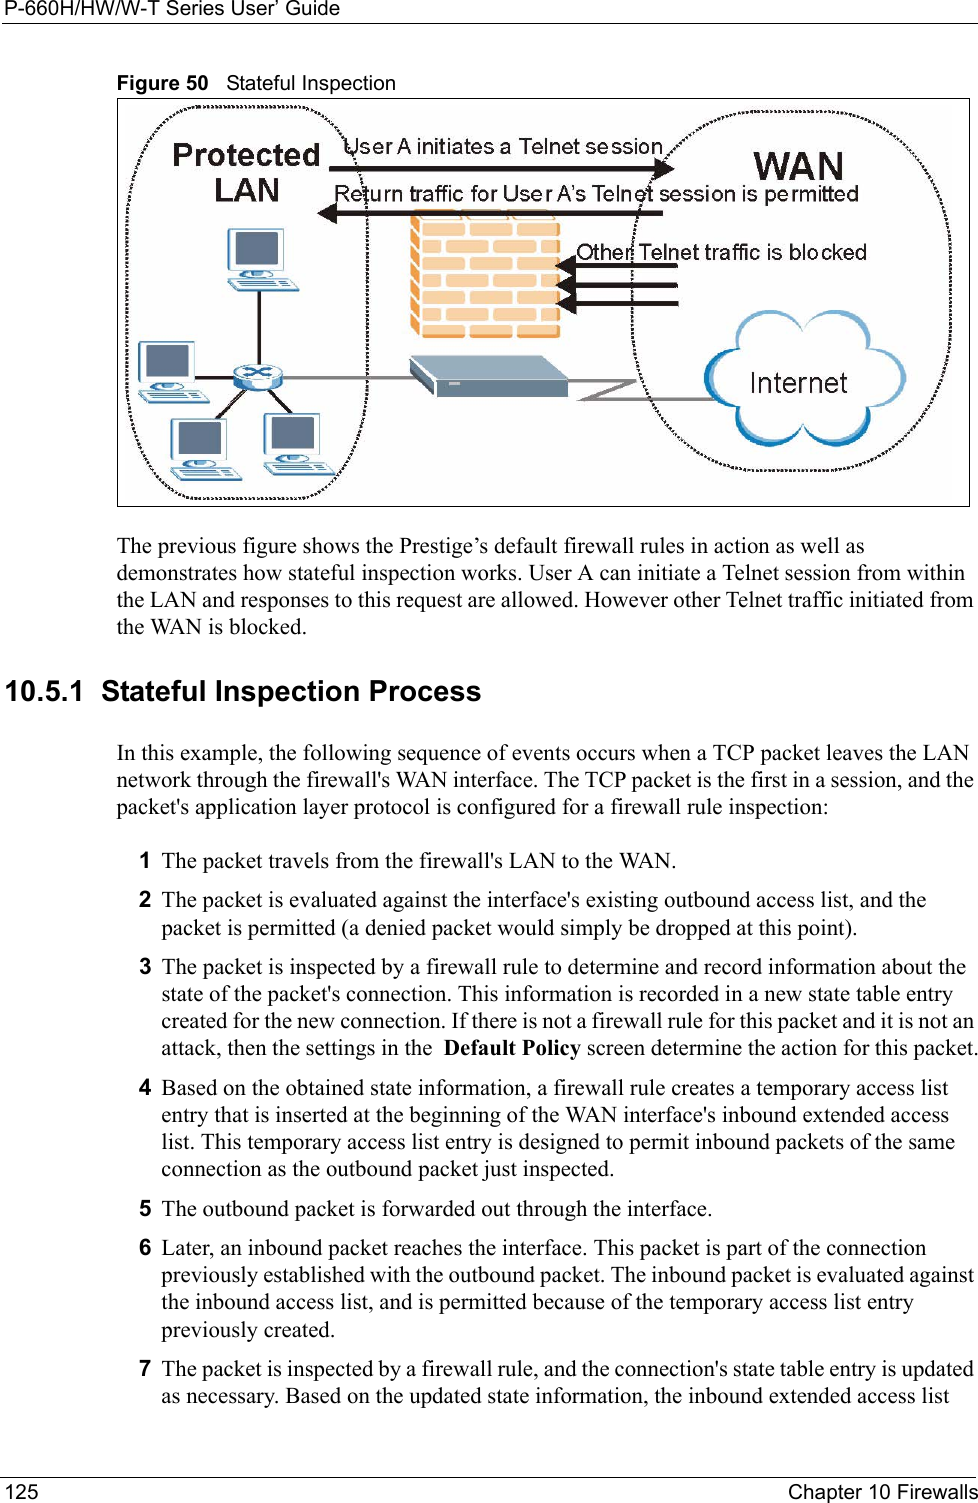 P-660H/HW/W-T Series User’ Guide125 Chapter 10 FirewallsFigure 50   Stateful InspectionThe previous figure shows the Prestige’s default firewall rules in action as well as demonstrates how stateful inspection works. User A can initiate a Telnet session from within the LAN and responses to this request are allowed. However other Telnet traffic initiated from the WAN is blocked.10.5.1  Stateful Inspection ProcessIn this example, the following sequence of events occurs when a TCP packet leaves the LAN network through the firewall&apos;s WAN interface. The TCP packet is the first in a session, and the packet&apos;s application layer protocol is configured for a firewall rule inspection:1The packet travels from the firewall&apos;s LAN to the WAN.2The packet is evaluated against the interface&apos;s existing outbound access list, and the packet is permitted (a denied packet would simply be dropped at this point).3The packet is inspected by a firewall rule to determine and record information about the state of the packet&apos;s connection. This information is recorded in a new state table entry created for the new connection. If there is not a firewall rule for this packet and it is not an attack, then the settings in the  Default Policy screen determine the action for this packet.4Based on the obtained state information, a firewall rule creates a temporary access list entry that is inserted at the beginning of the WAN interface&apos;s inbound extended access list. This temporary access list entry is designed to permit inbound packets of the same connection as the outbound packet just inspected.5The outbound packet is forwarded out through the interface.6Later, an inbound packet reaches the interface. This packet is part of the connection previously established with the outbound packet. The inbound packet is evaluated against the inbound access list, and is permitted because of the temporary access list entry previously created.7The packet is inspected by a firewall rule, and the connection&apos;s state table entry is updated as necessary. Based on the updated state information, the inbound extended access list 